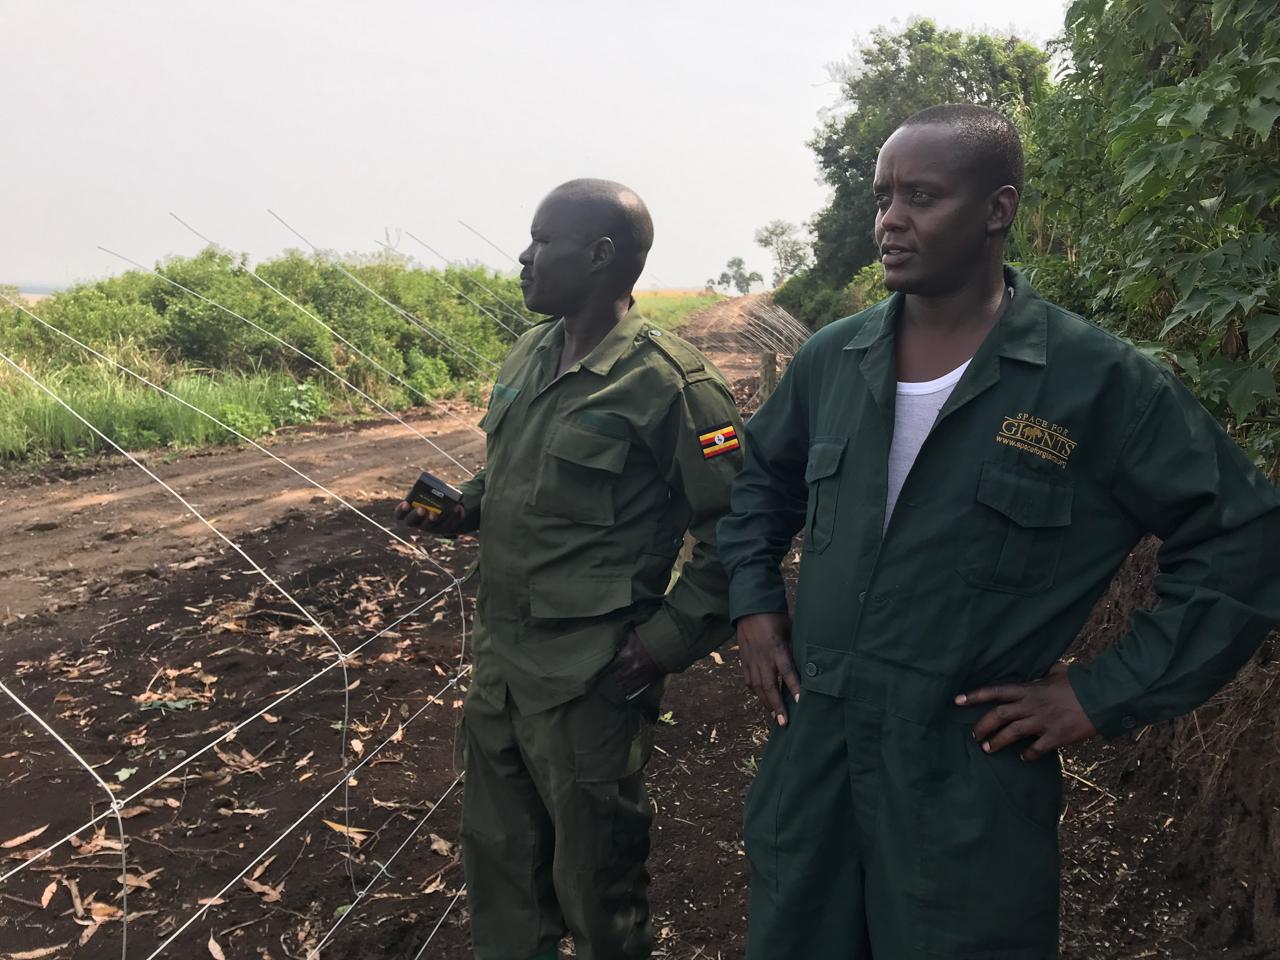 Space for Giants built the fence with the Uganda Wildlife Authority